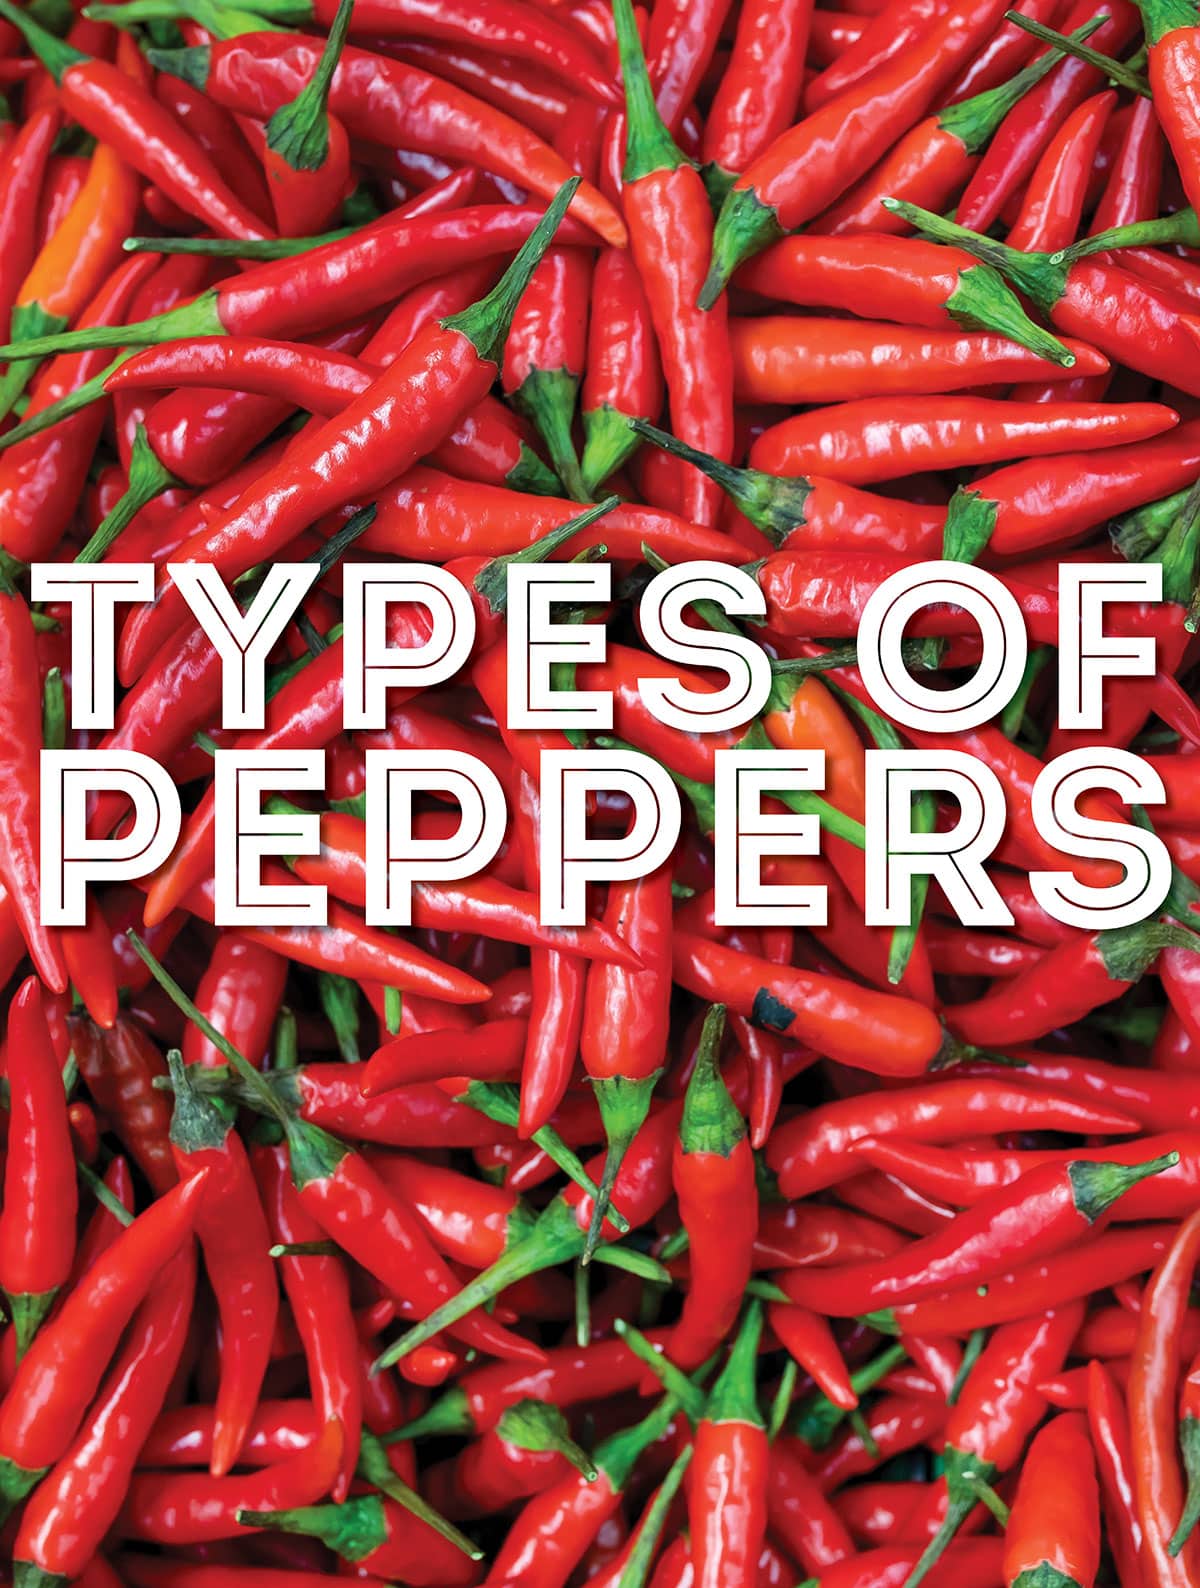 29 Types of Peppers from Mild to Hot Photos!)